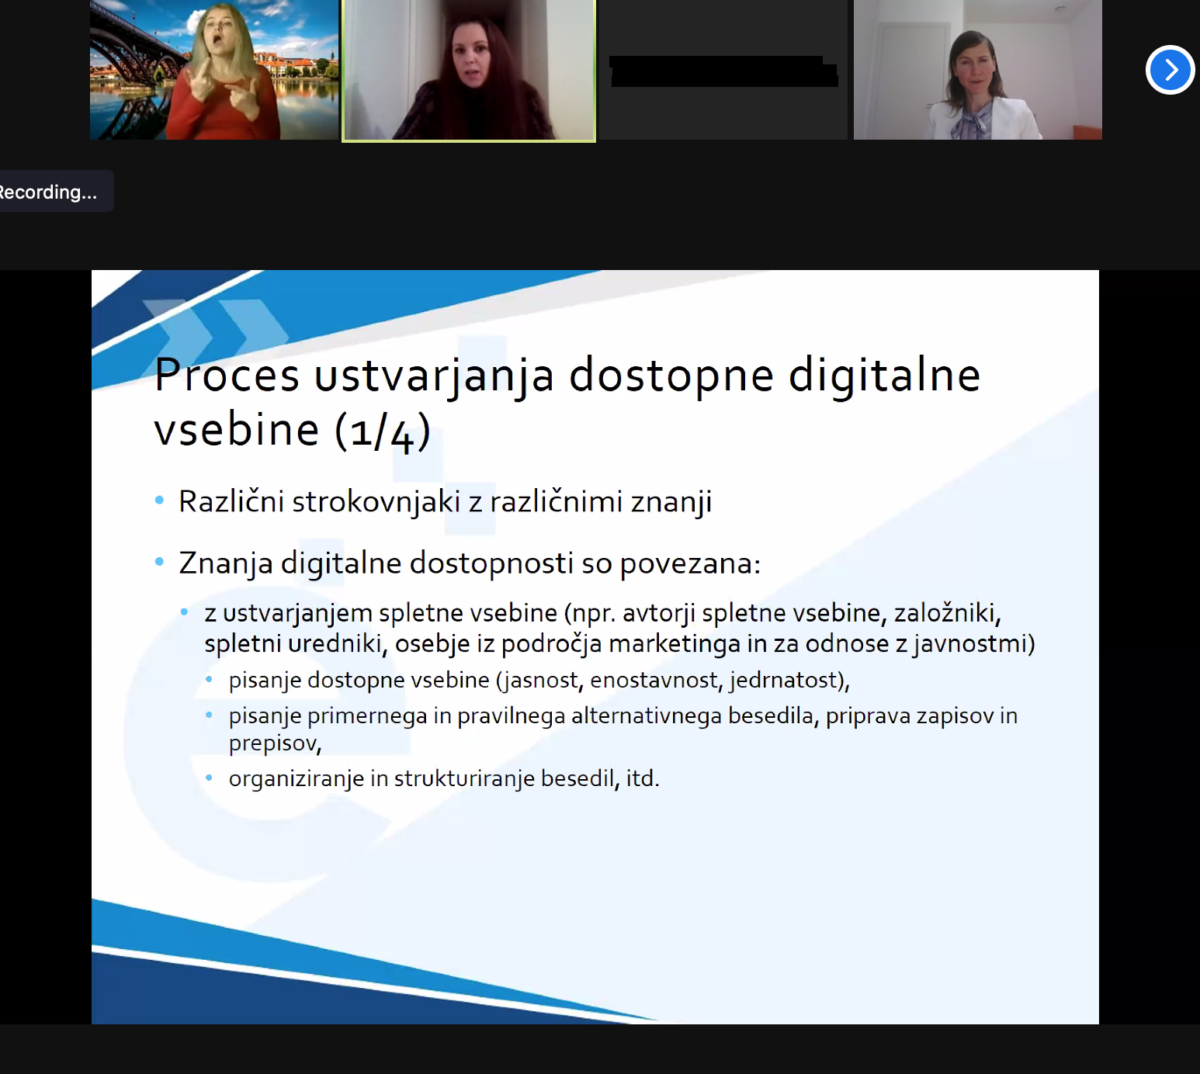 A screenshot of the PowerPoint presentation presented during the conference by a professor from the University of Maribor.